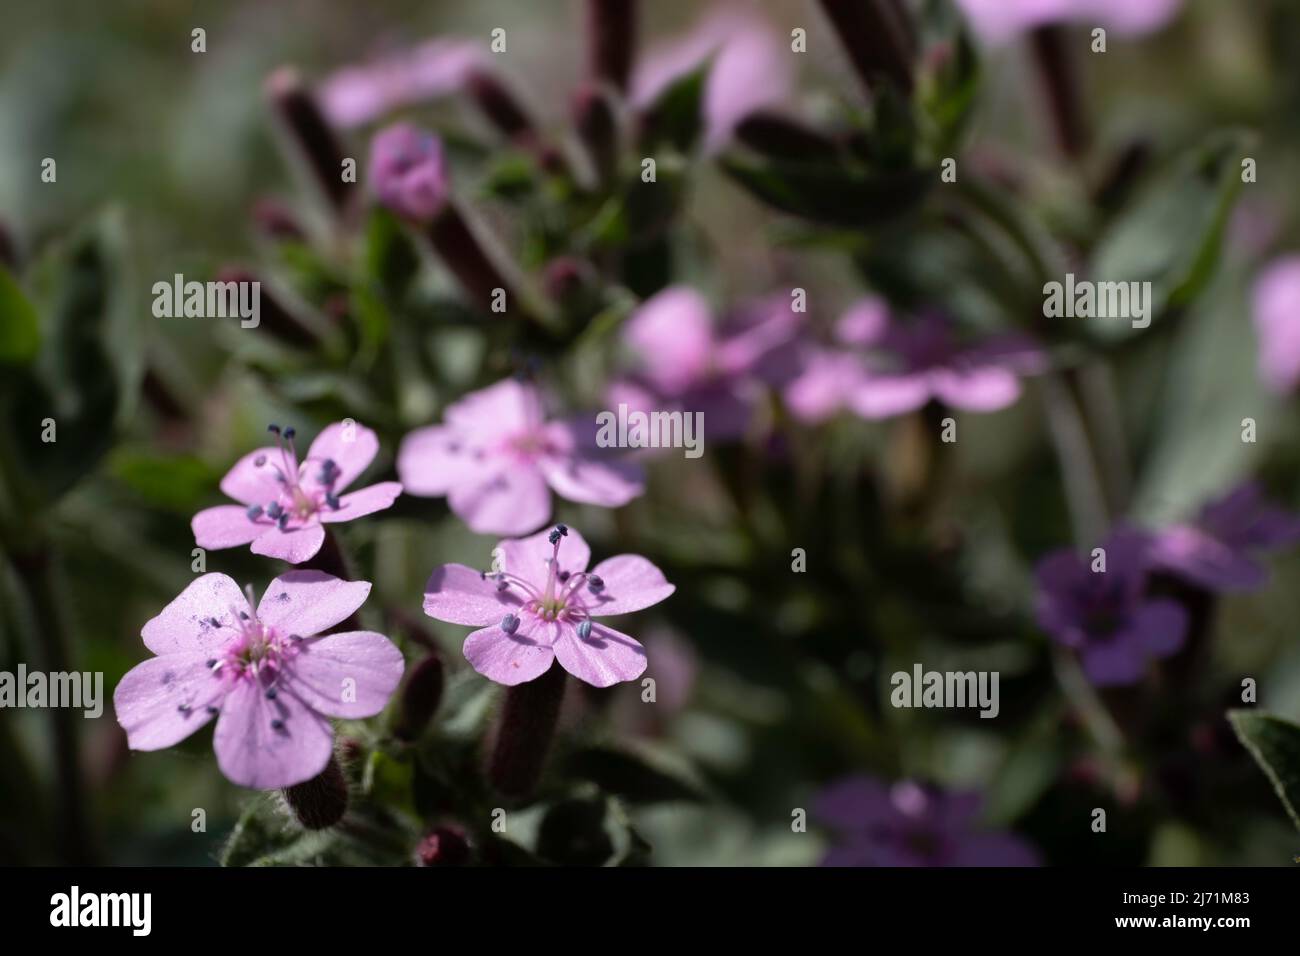 Pink flowers of the Saponaria officinalis or common soapwort in summer with close depth of field. Focus on the second flower at the bottom left Stock Photo